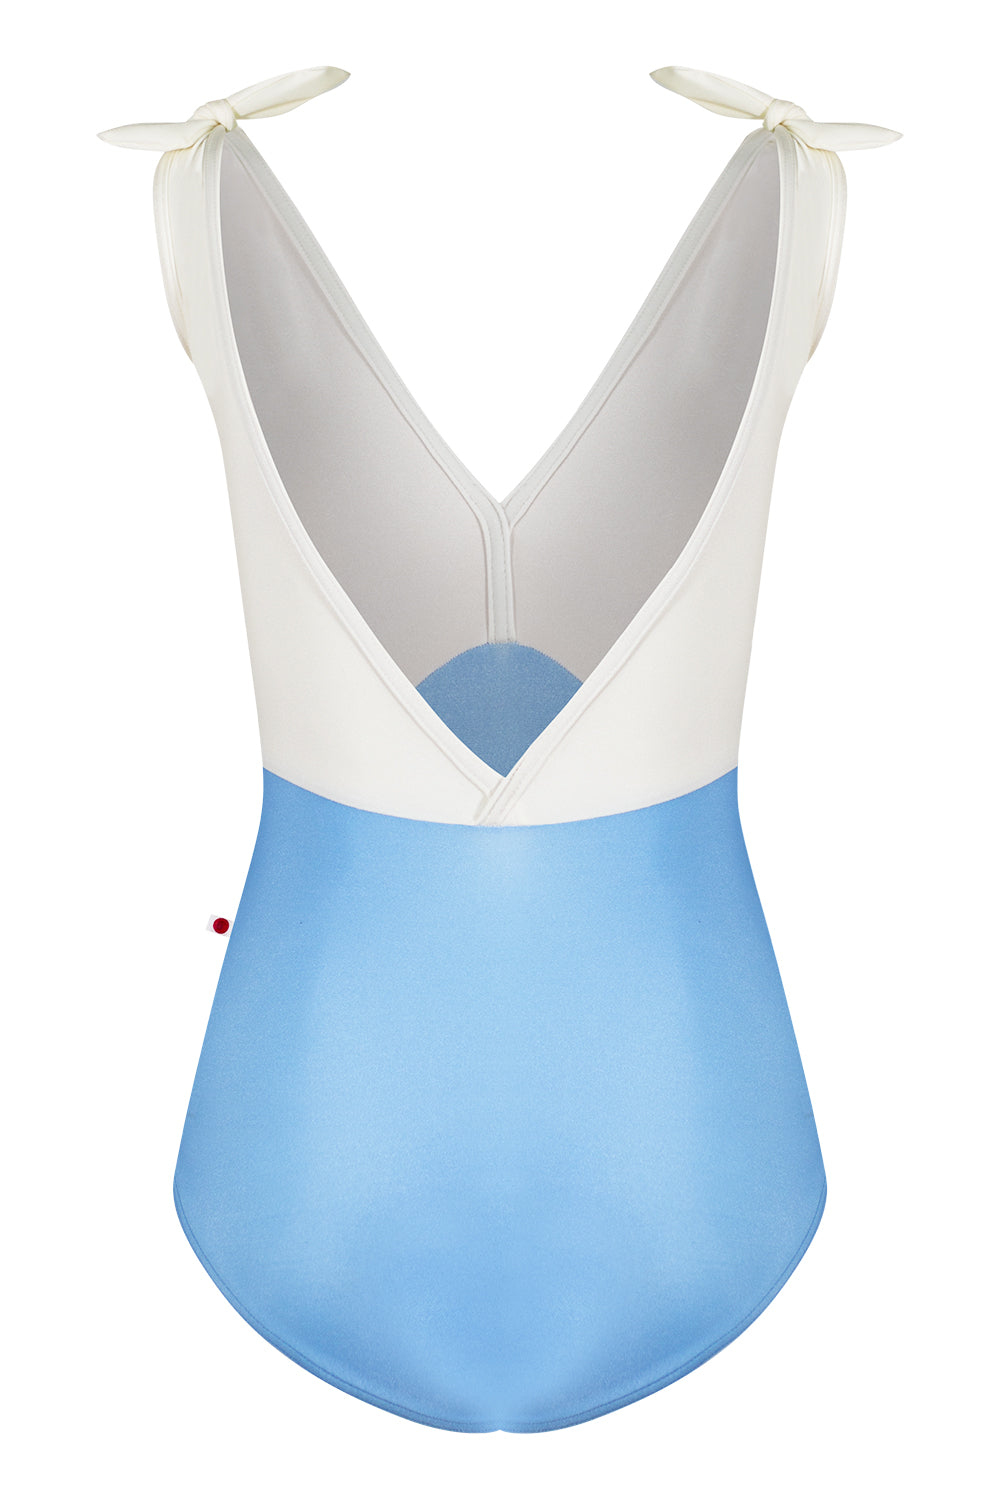 Alicia leotard in N-Moontide body color with N-Antique top & trim color and matching shoulder bows